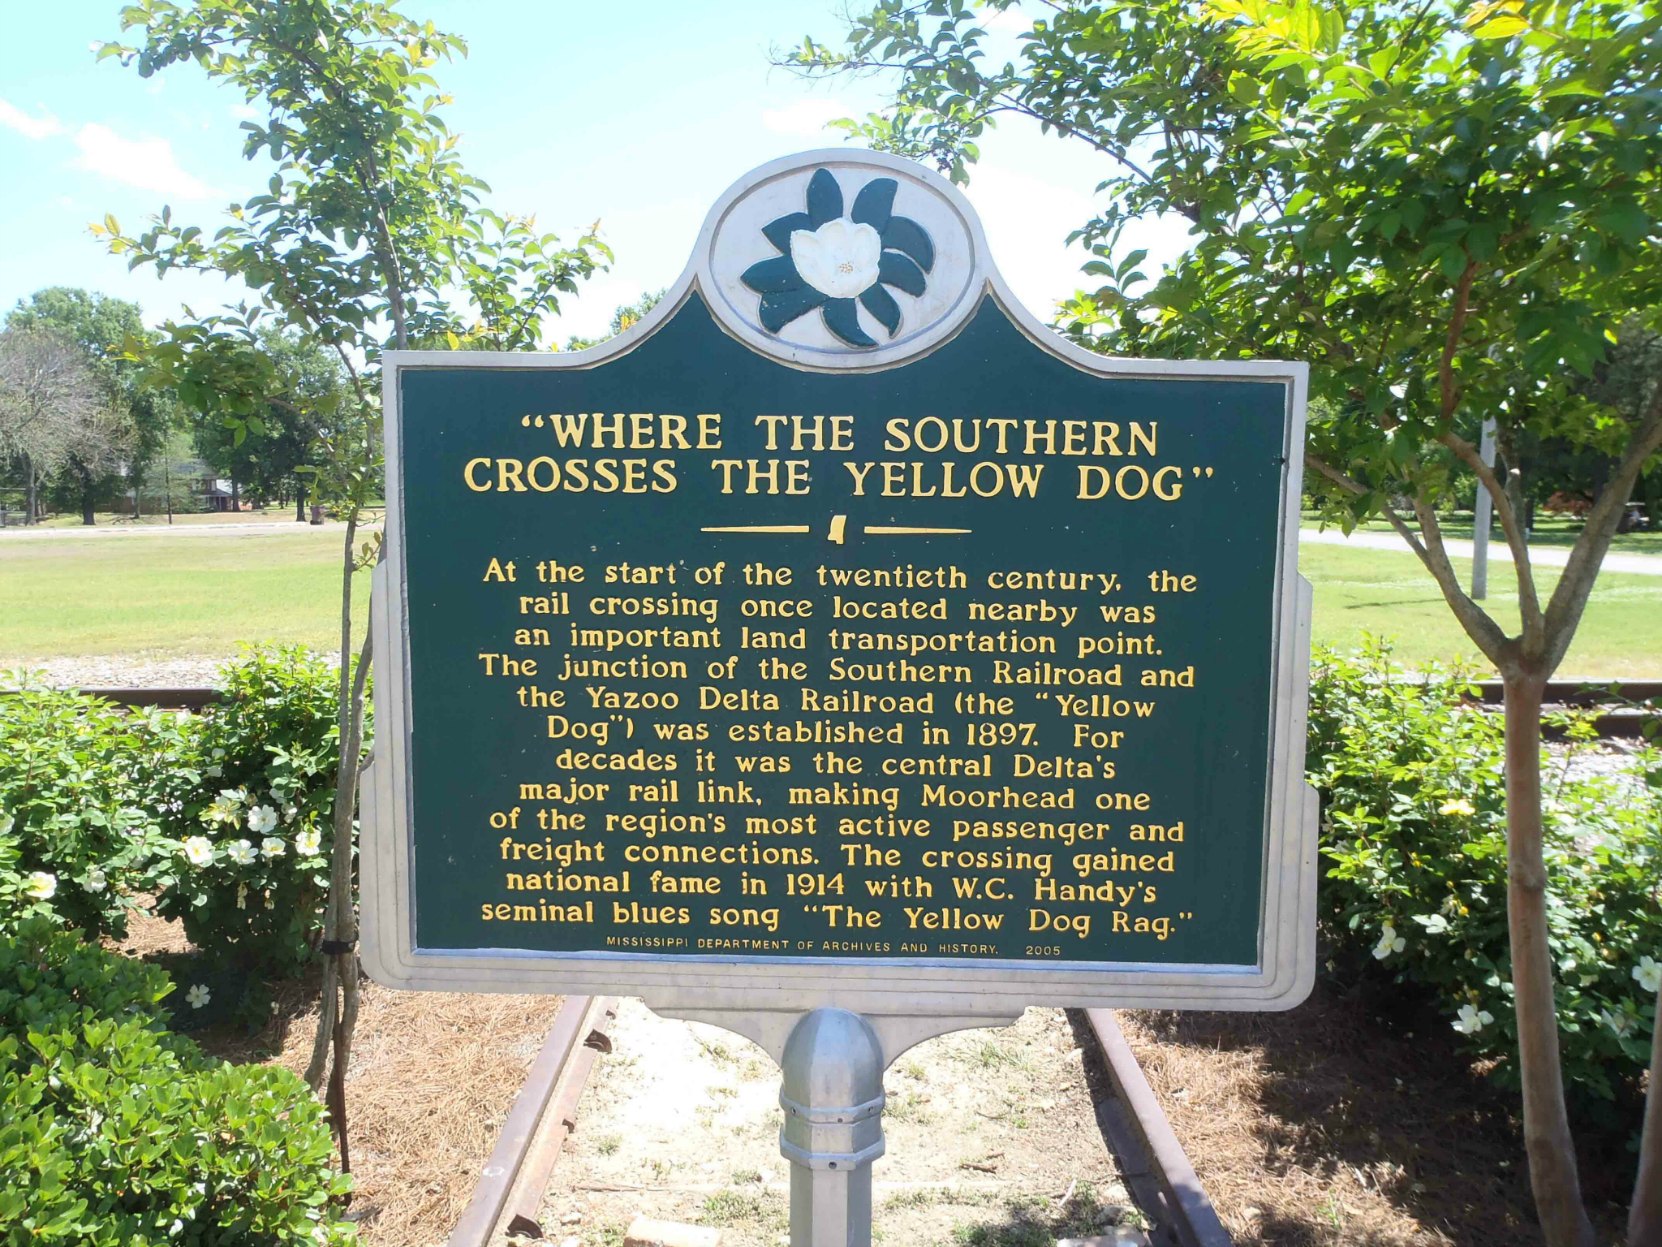 The Mississippi Department of Archives & History marker "Where The Southern Crosses The Dog", Moorhead, Mississippi